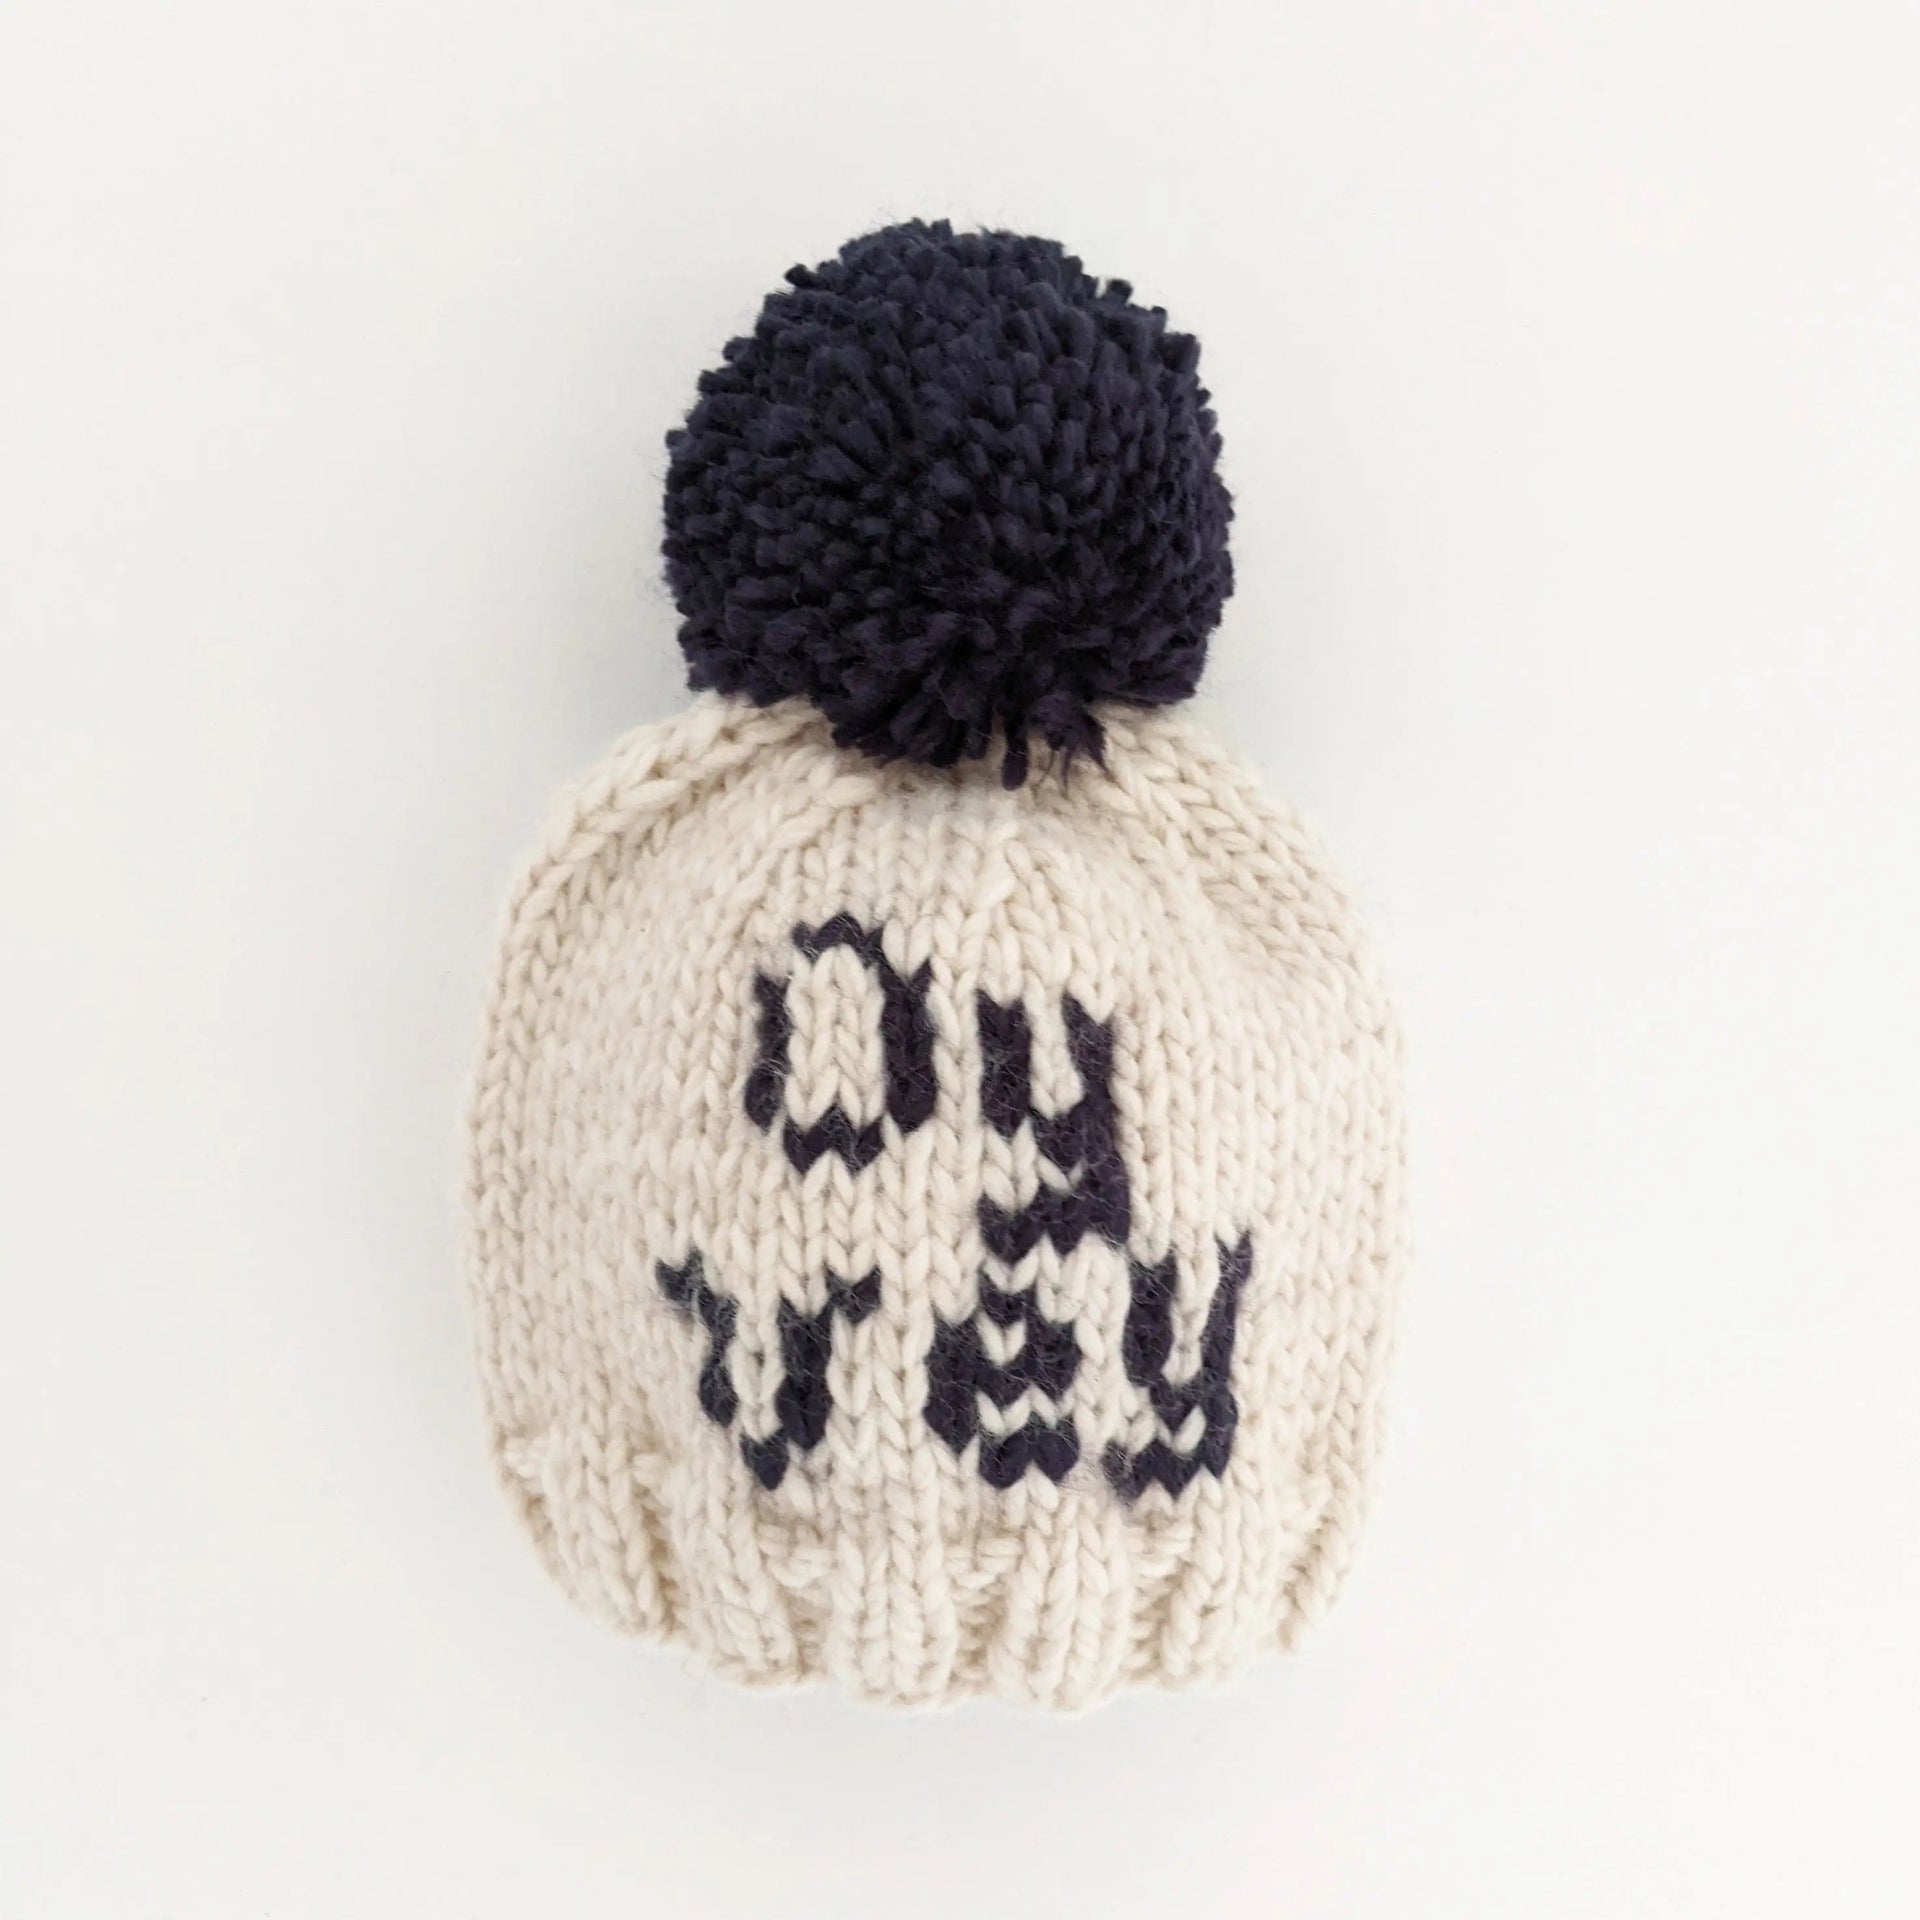 Huggalugs Hats Oy Vey Hand Knit Beanie Hat - Adult